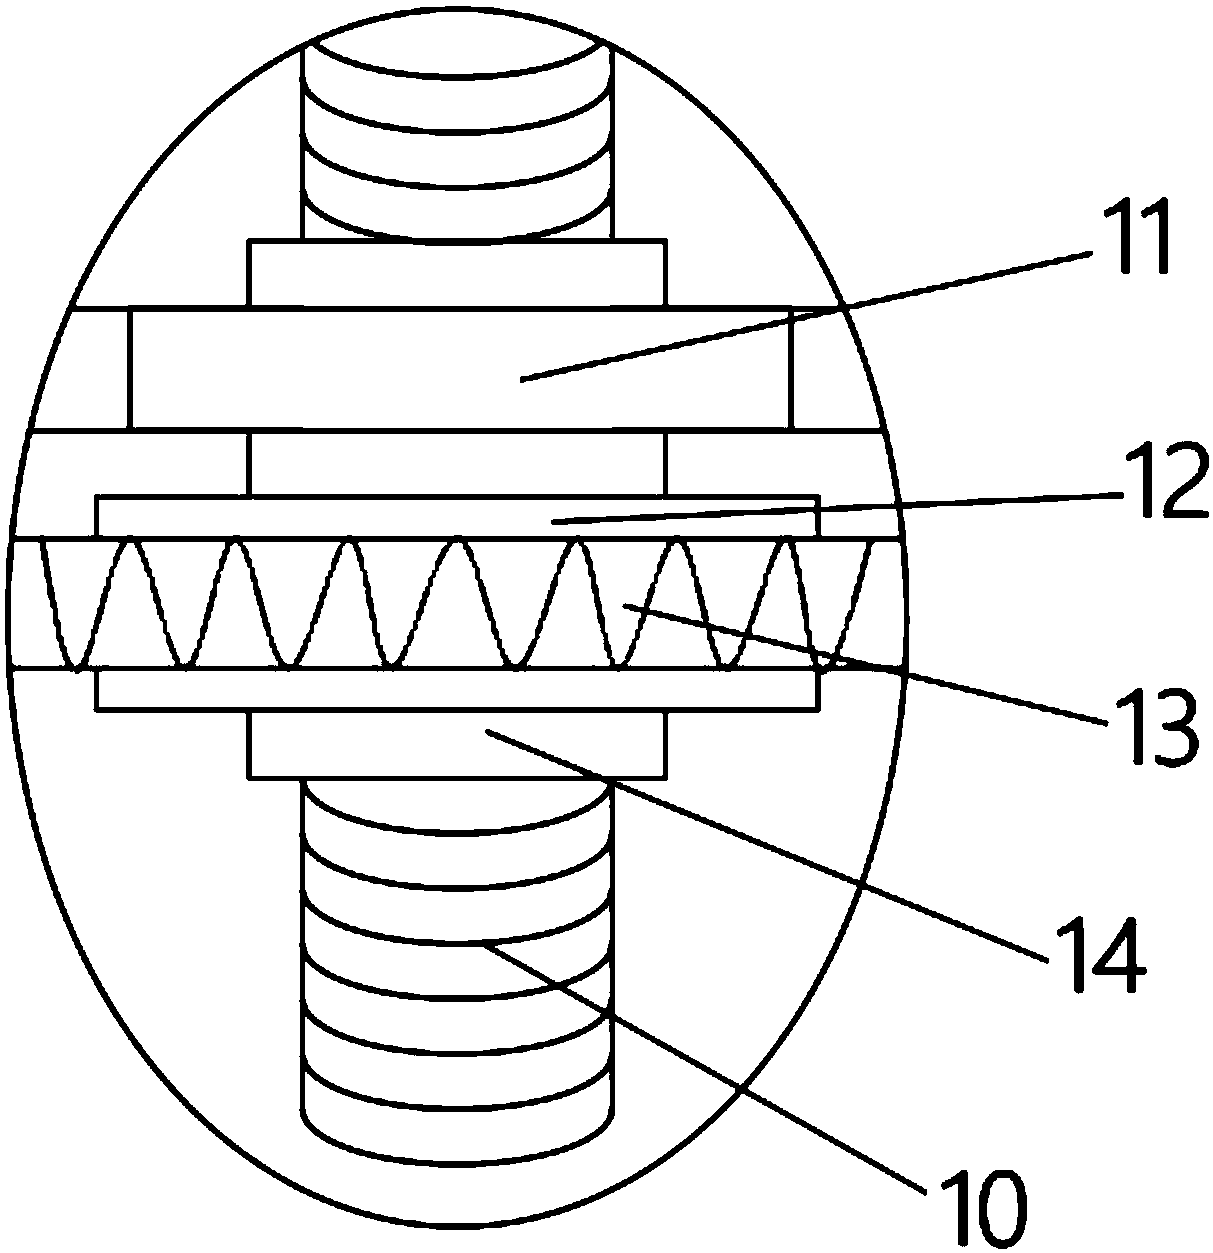 Multidirectional-adjustable type textile cloth cutting device